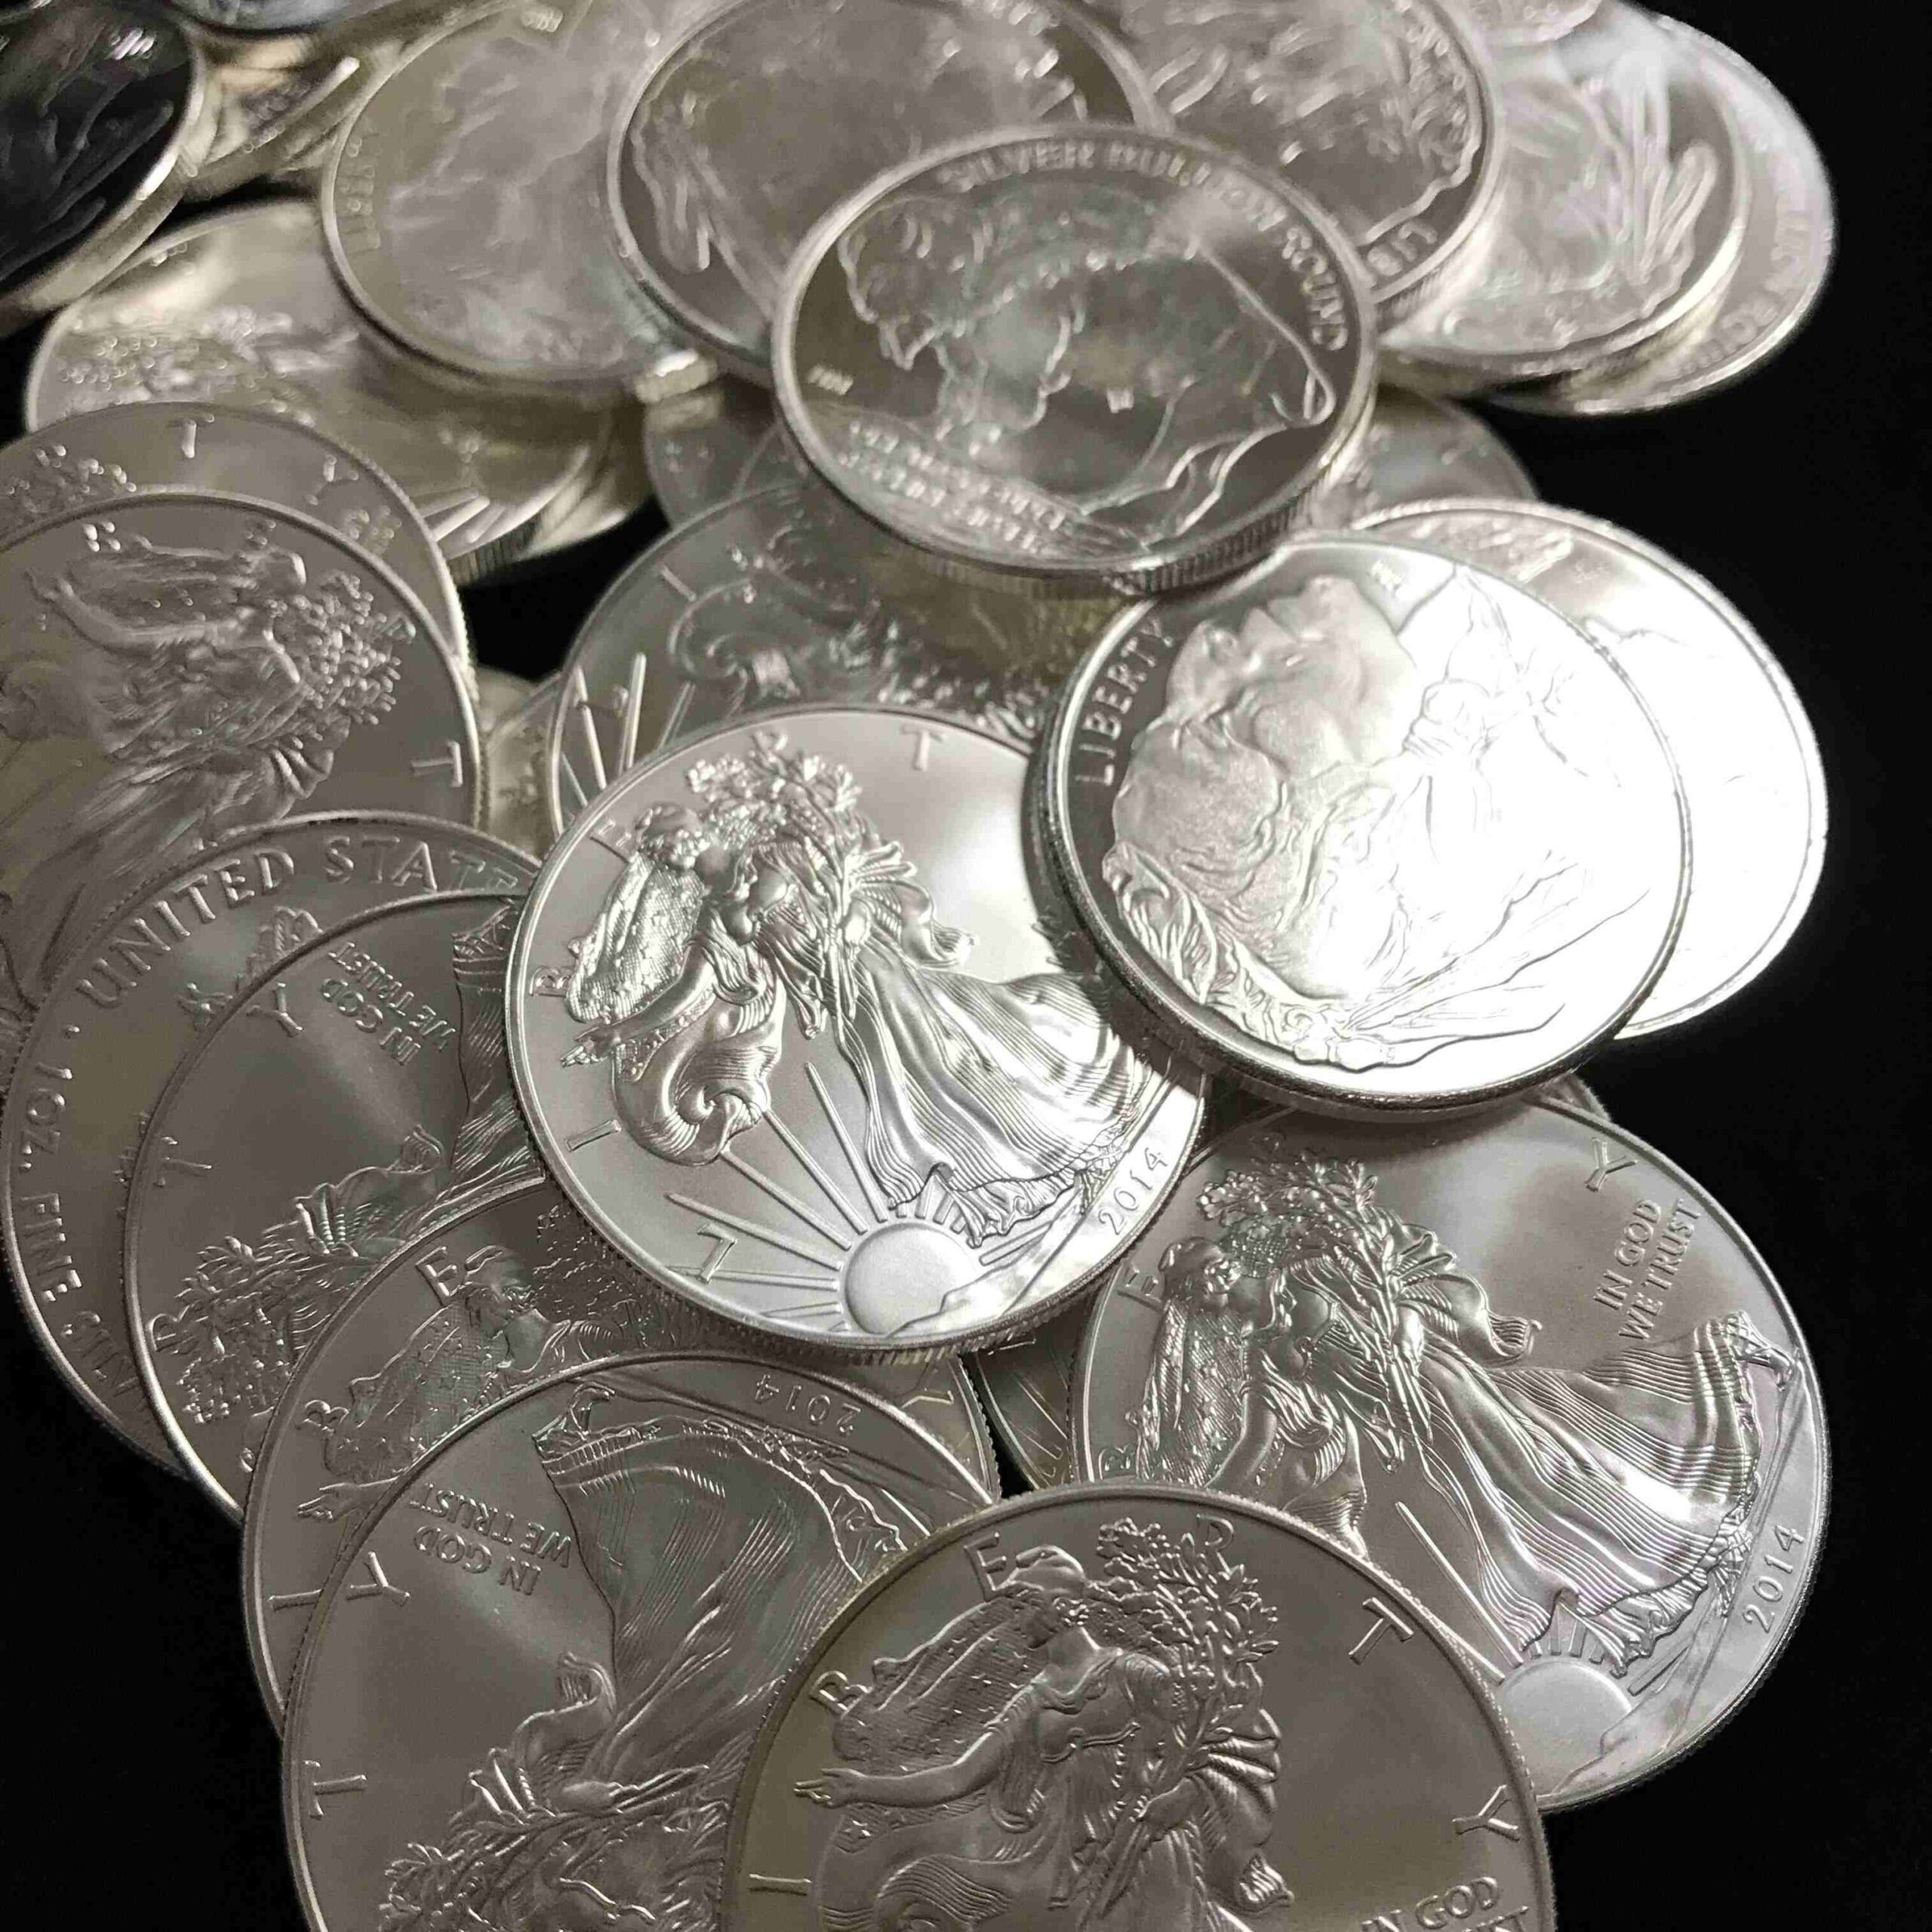 A pile of silver coins sitting on top of each other.